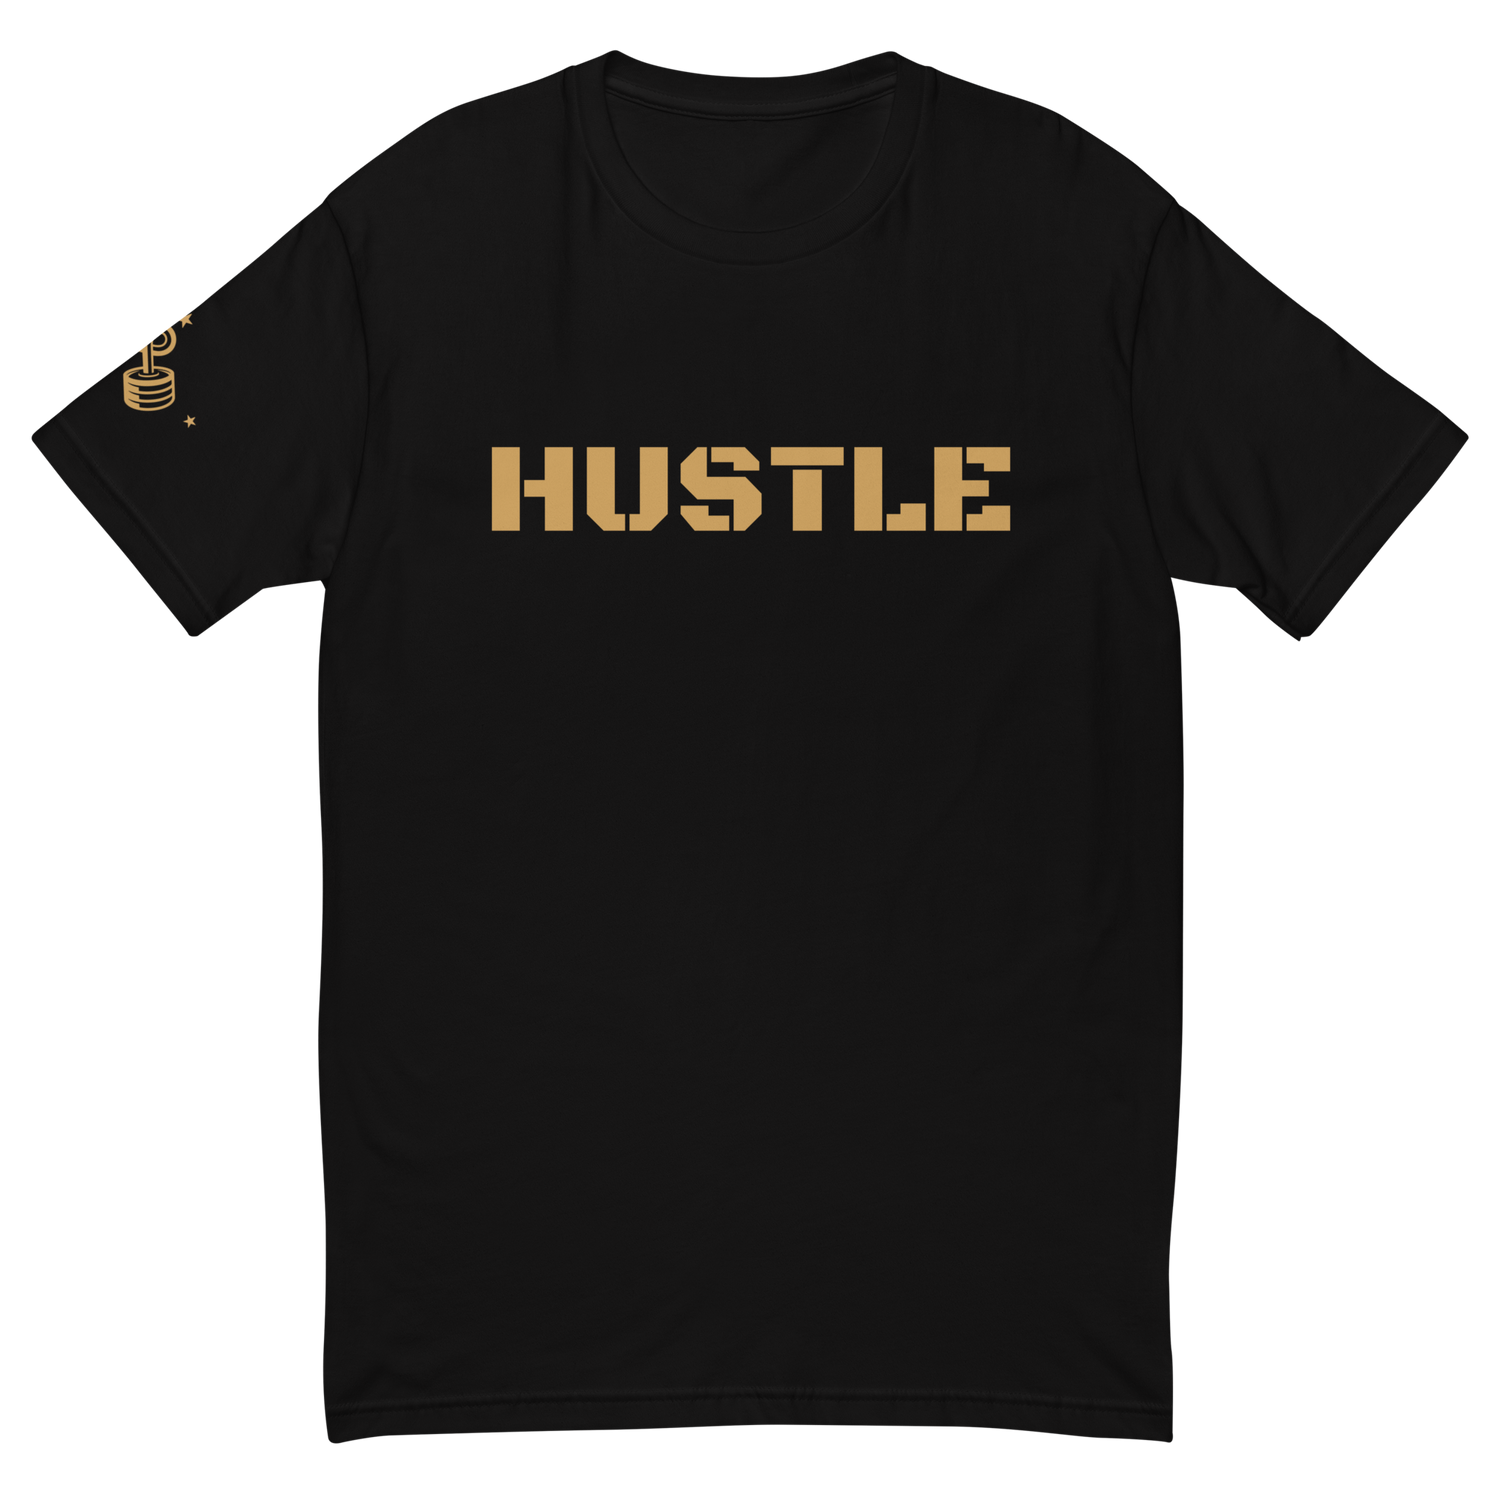 The Hustle Collection